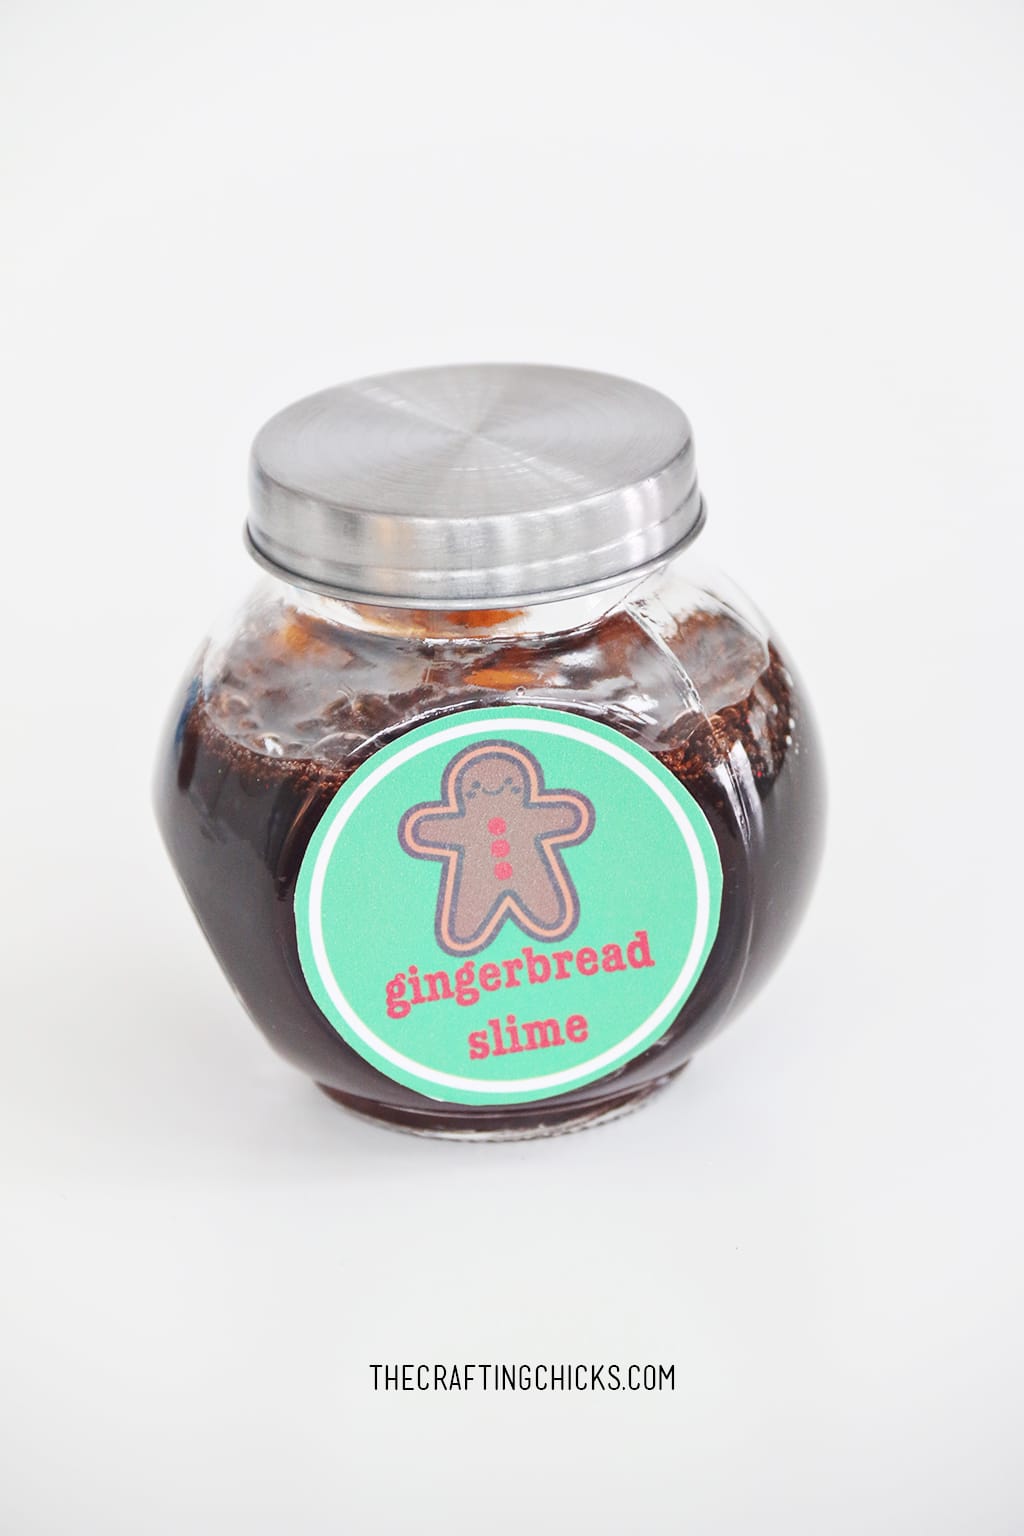 Brown Slime in a glass jar with lid and Gingerbread Slime tag on jar.